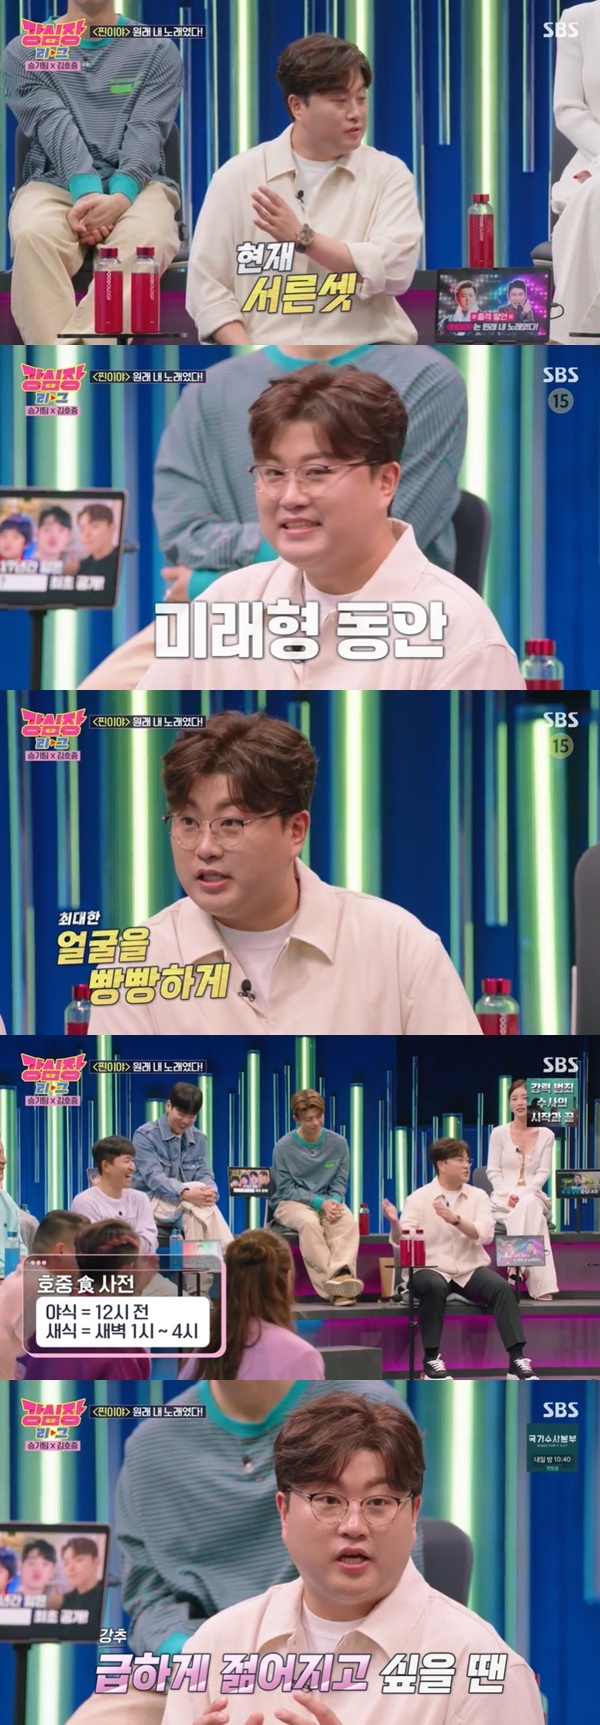 Kim Ho-joong listened to a new meal instead of Night food as a secret.On July 11, SBS new entertainment  ⁇  Strong Heart League  ⁇  singer Kim Ho-joong boasted the same time as 14 years ago.Kang Ho-dong said to singer Kim Ho-joong, whom he met for the first time as a stocking dancer 14 years ago, My face has not changed a bit. It is the same as when I was in high school, and Kim Ho-joong said, At that time, pictures and videos are no different from now.He is now 33 years old, he said.Kim Ho-joong then made his face as big as possible with his secret. Lets fill it up with self-injection rather than injection, and explained about the new food instead of Night food.Kim Ho-joong explained that  ⁇ Night food is before 12 oclock and the new food is from 1 oclock to 4 oclock.Kim Ho-joong said, I ate one at 4 oclock yesterday, and I ate steamed dumplings. Kang Ho-dong asked me if it should be  ⁇ , and Kim Ho-joong said, It should not be  ⁇   ⁇   ⁇ .When the salted fish comes up, it is about instant rice. I do not hit a lot. 